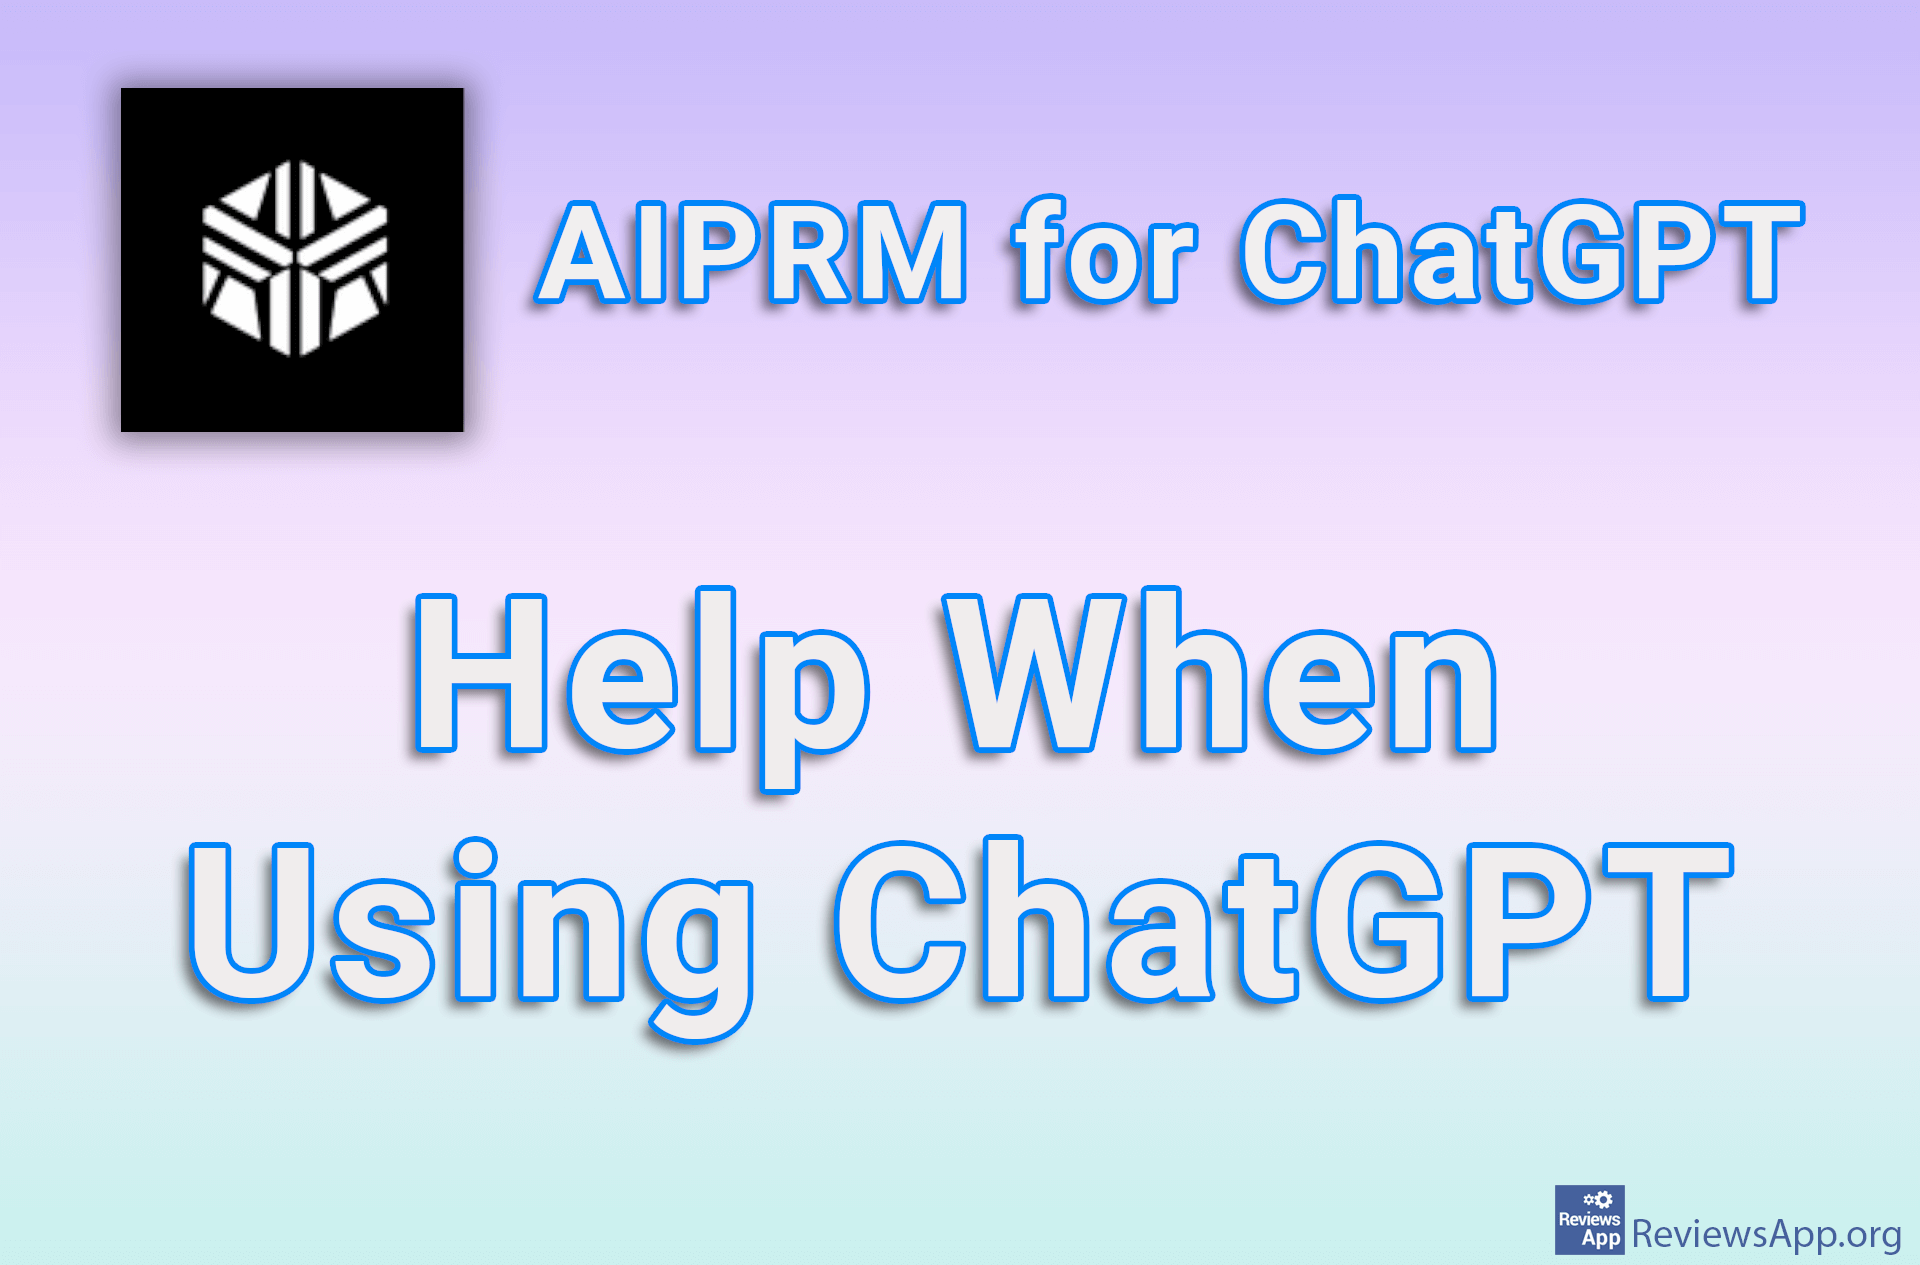 AIPRM for ChatGPT – Help When Using ChatGPT